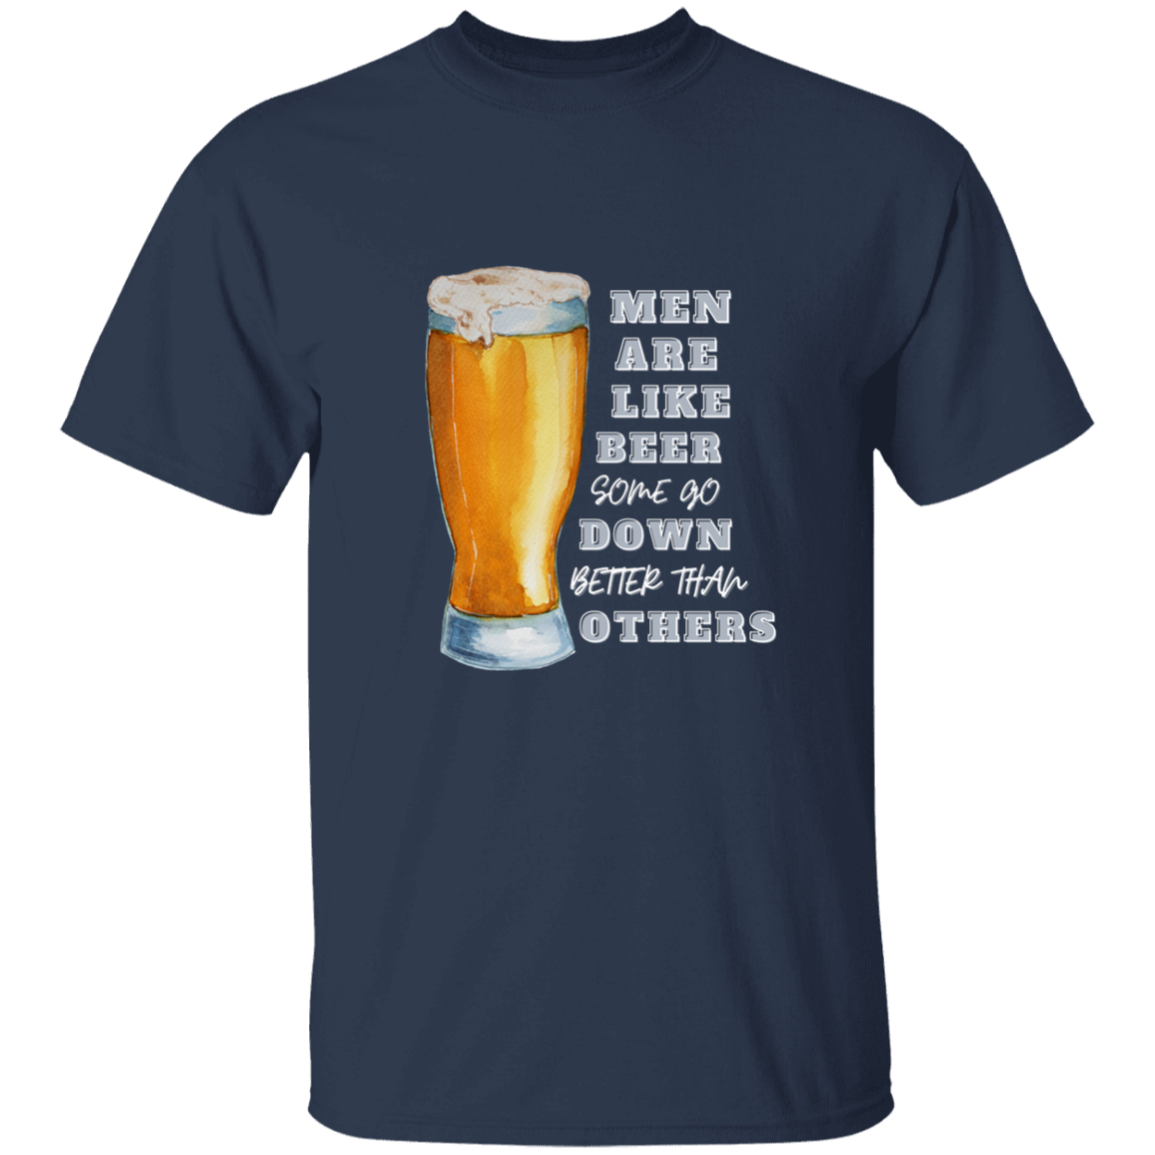 Men Are Like Beer, Some Go Down Better Than Others - Thoughtful Blossom